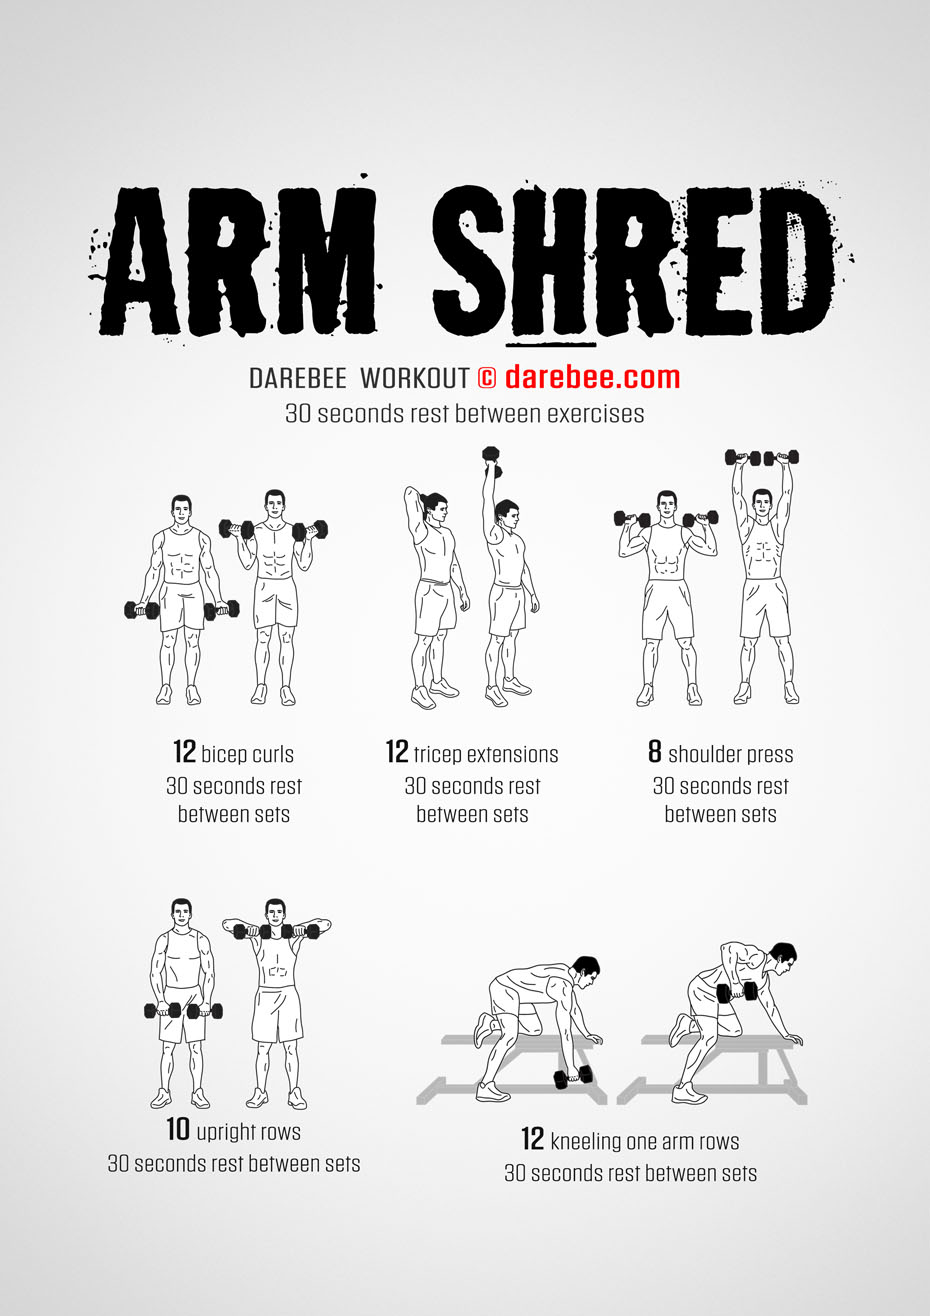 https://darebee.com/images/workouts/arm-shred-workout.jpg